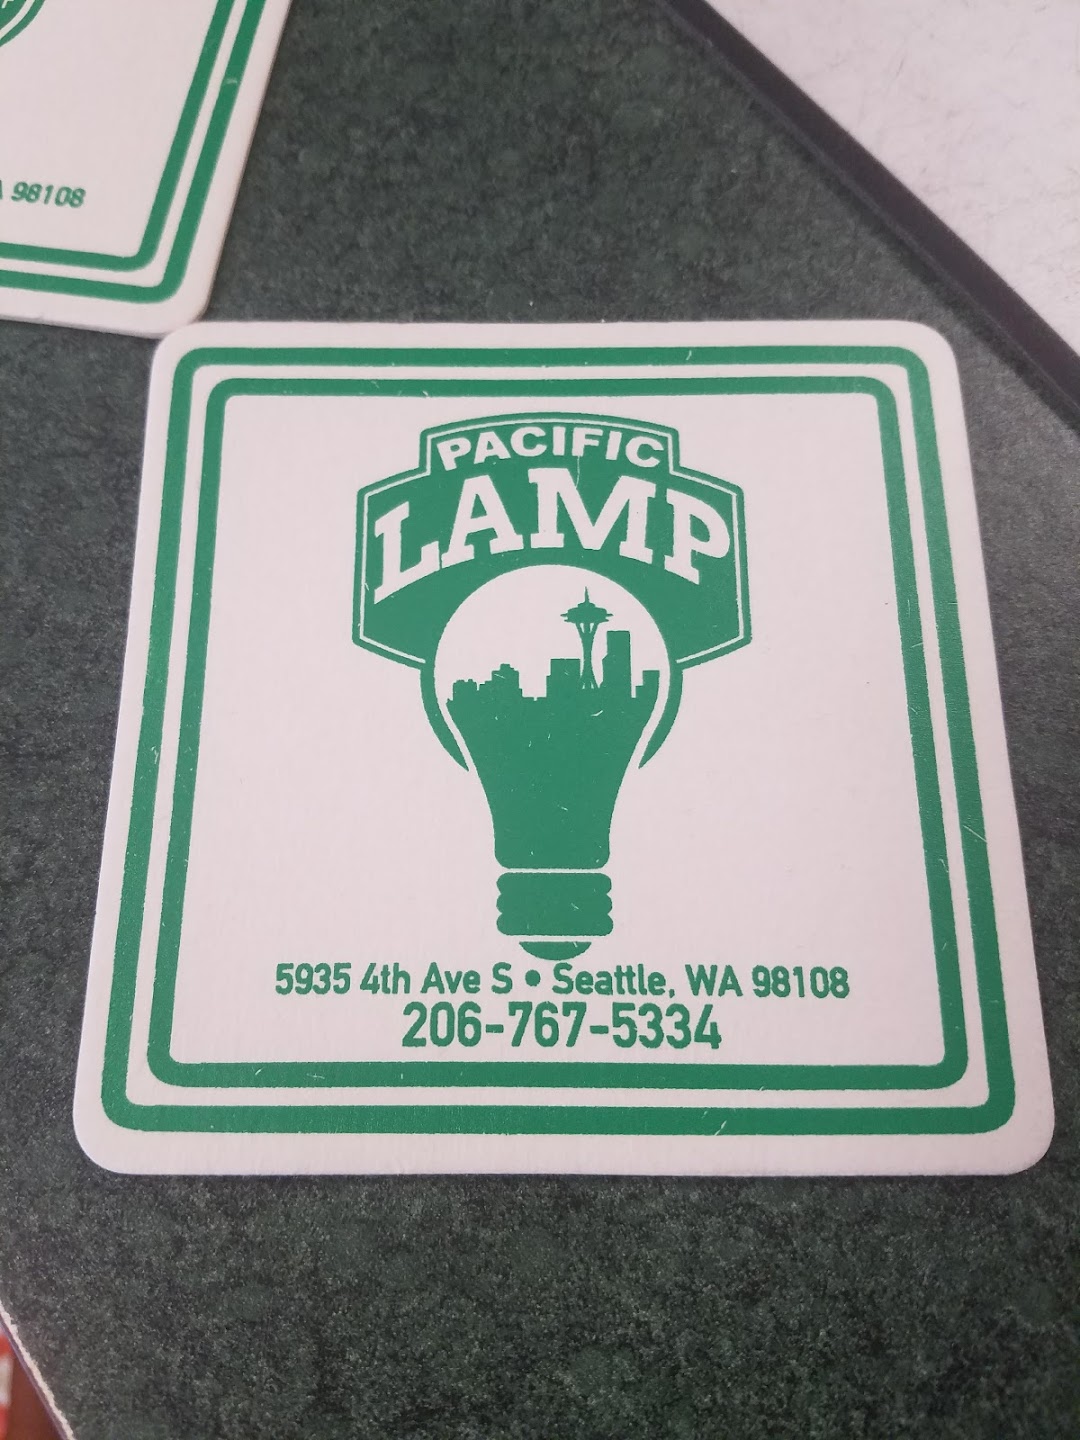 Pacific Lamp Supply Co